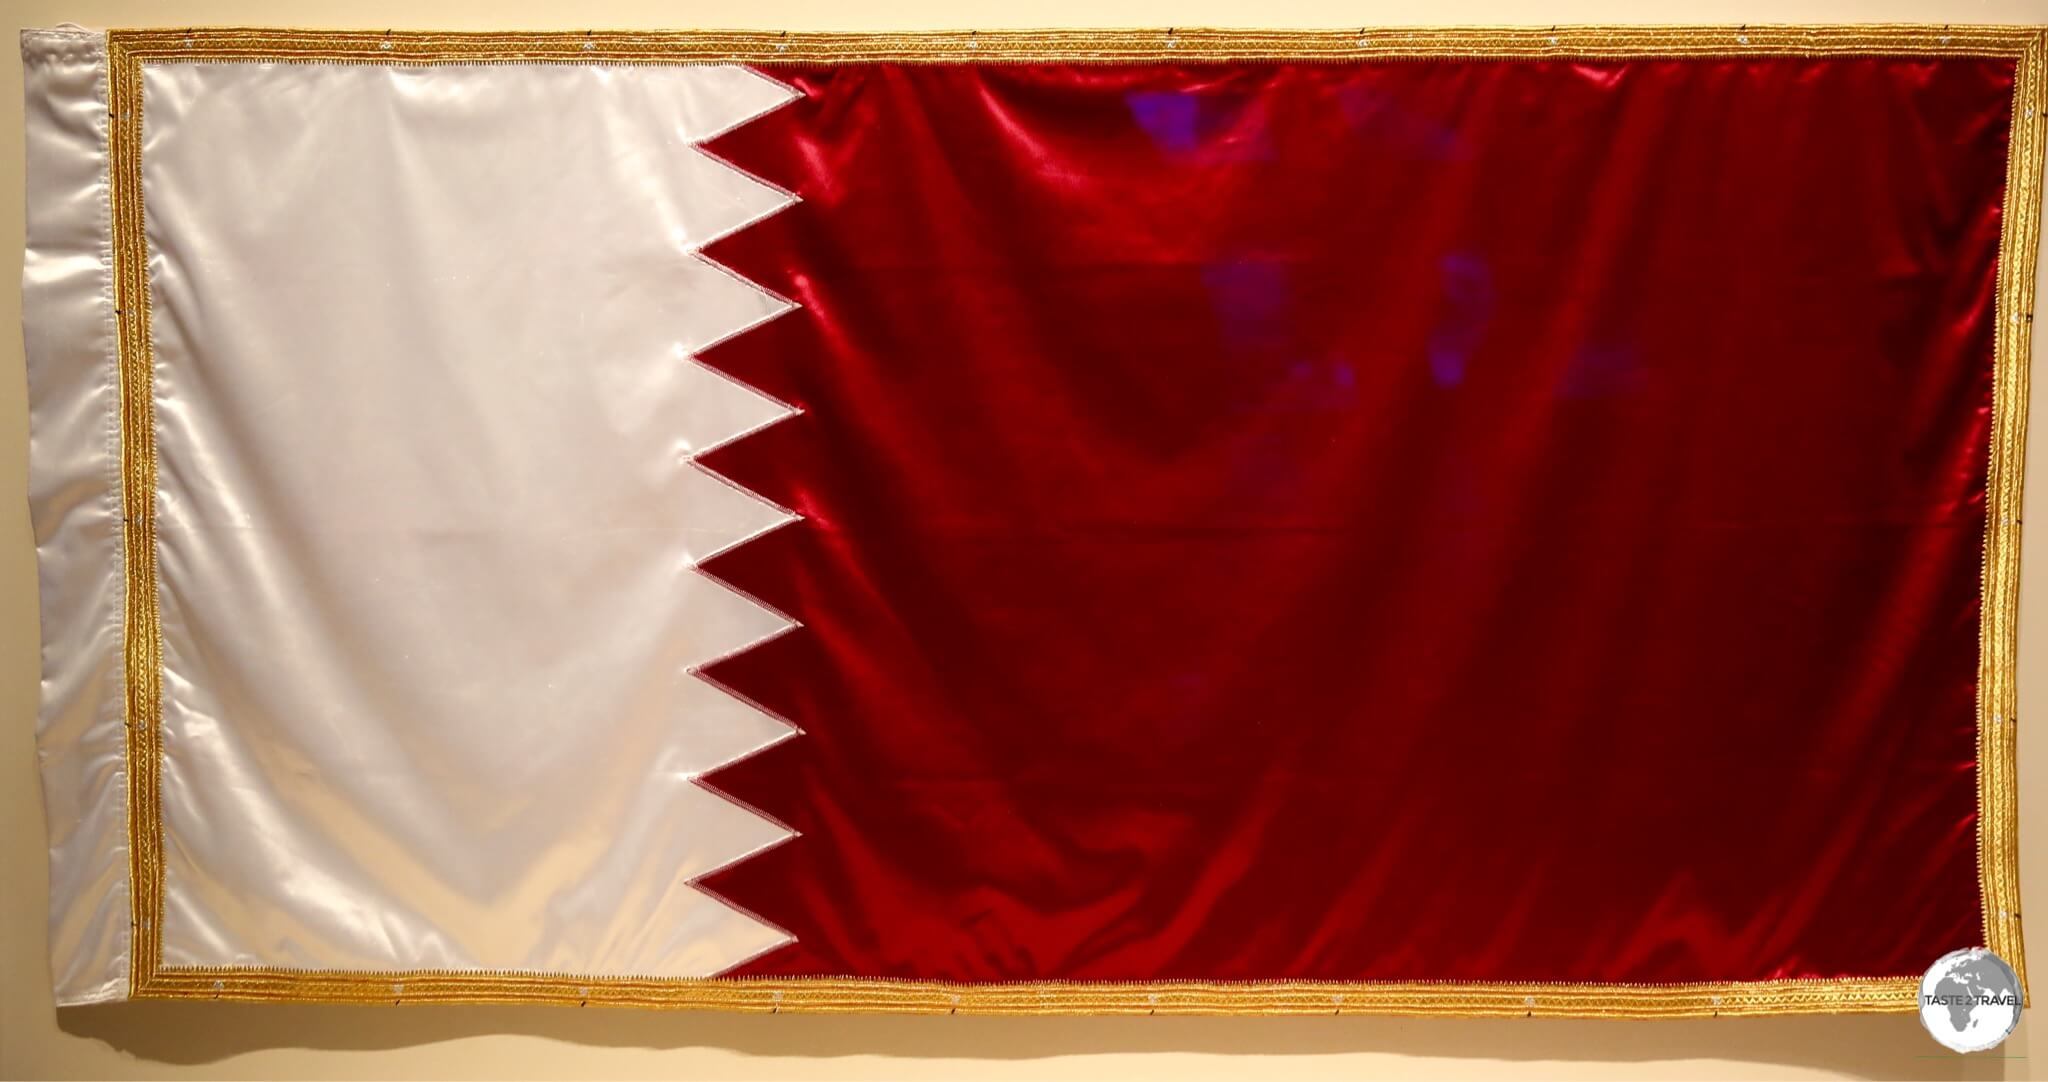 The Qatar flag displayed in the National Museum of Qatar.